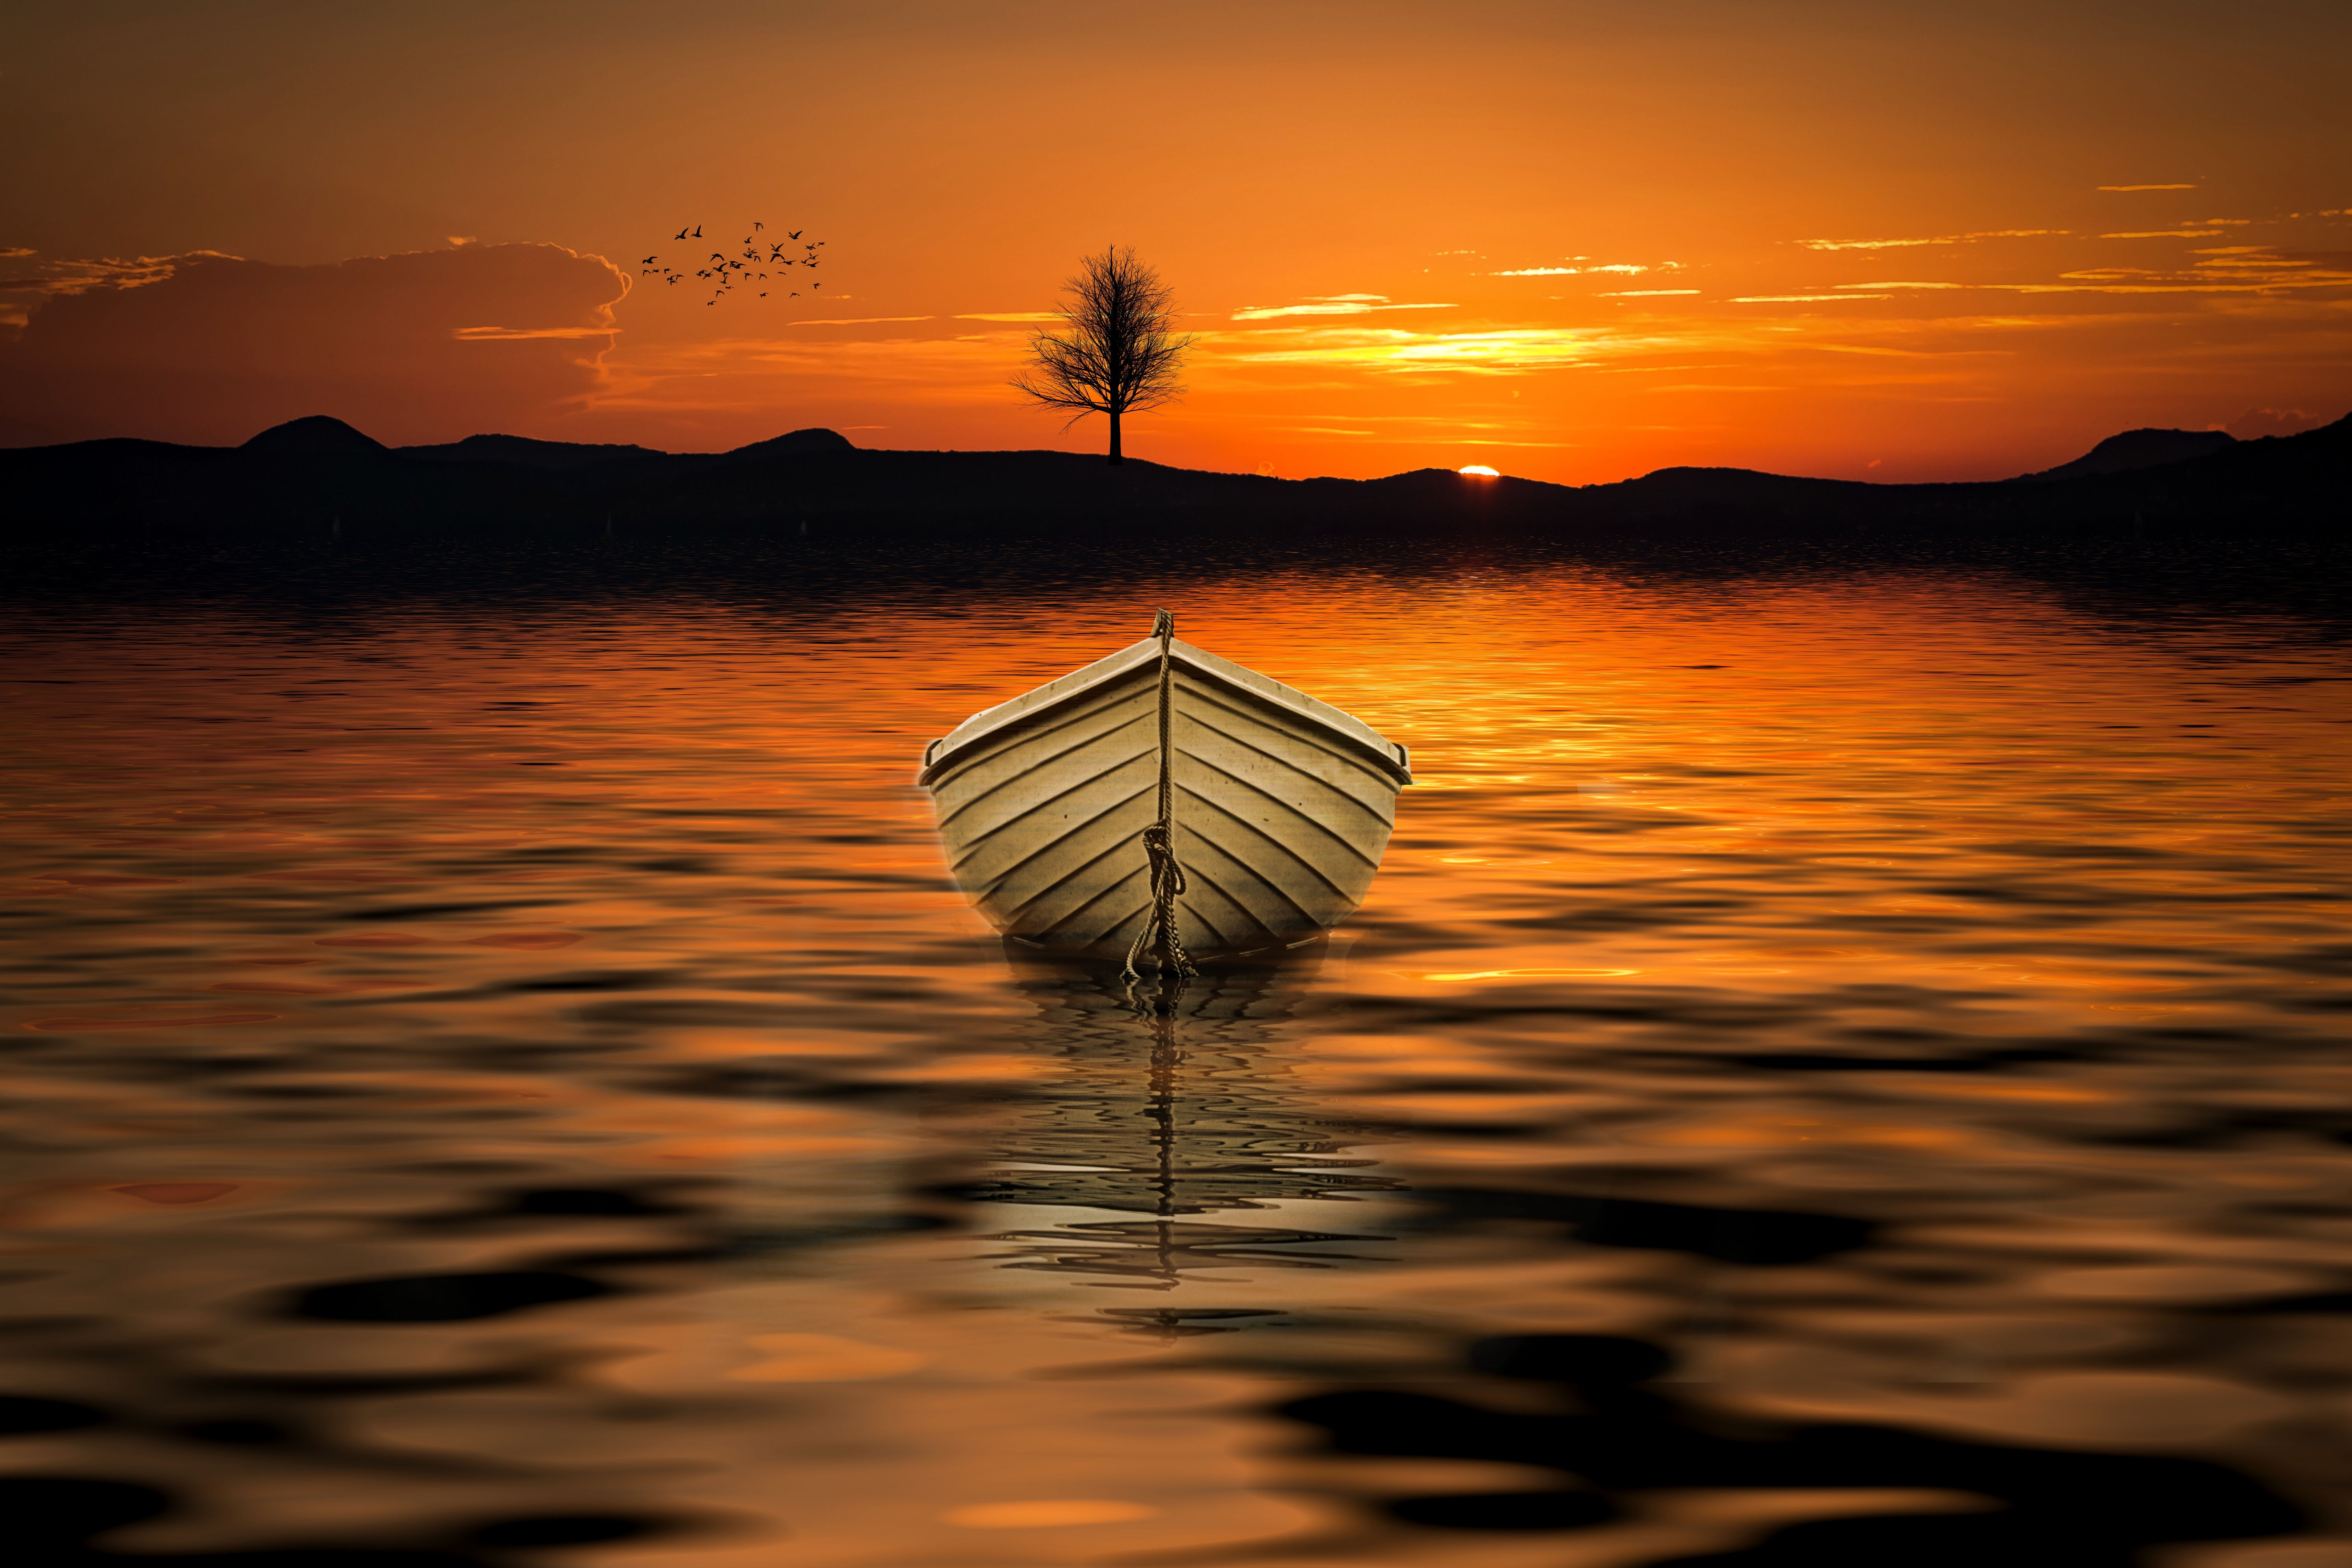 Brown row boat on body of water painting photo